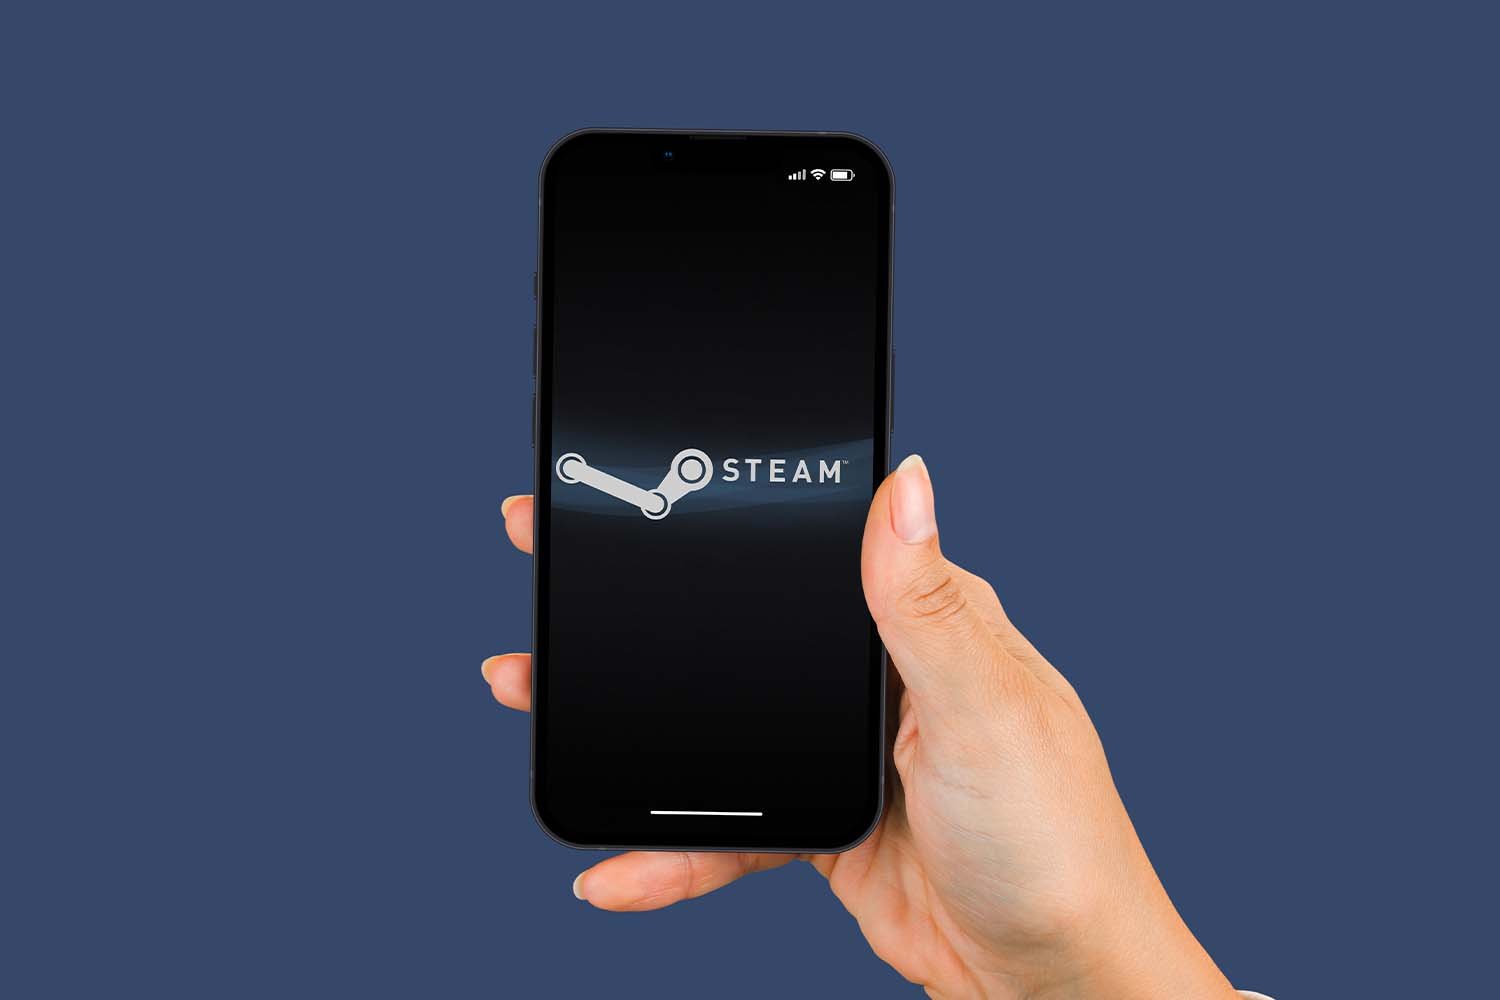 How To Play Steam Games On Your Phone 